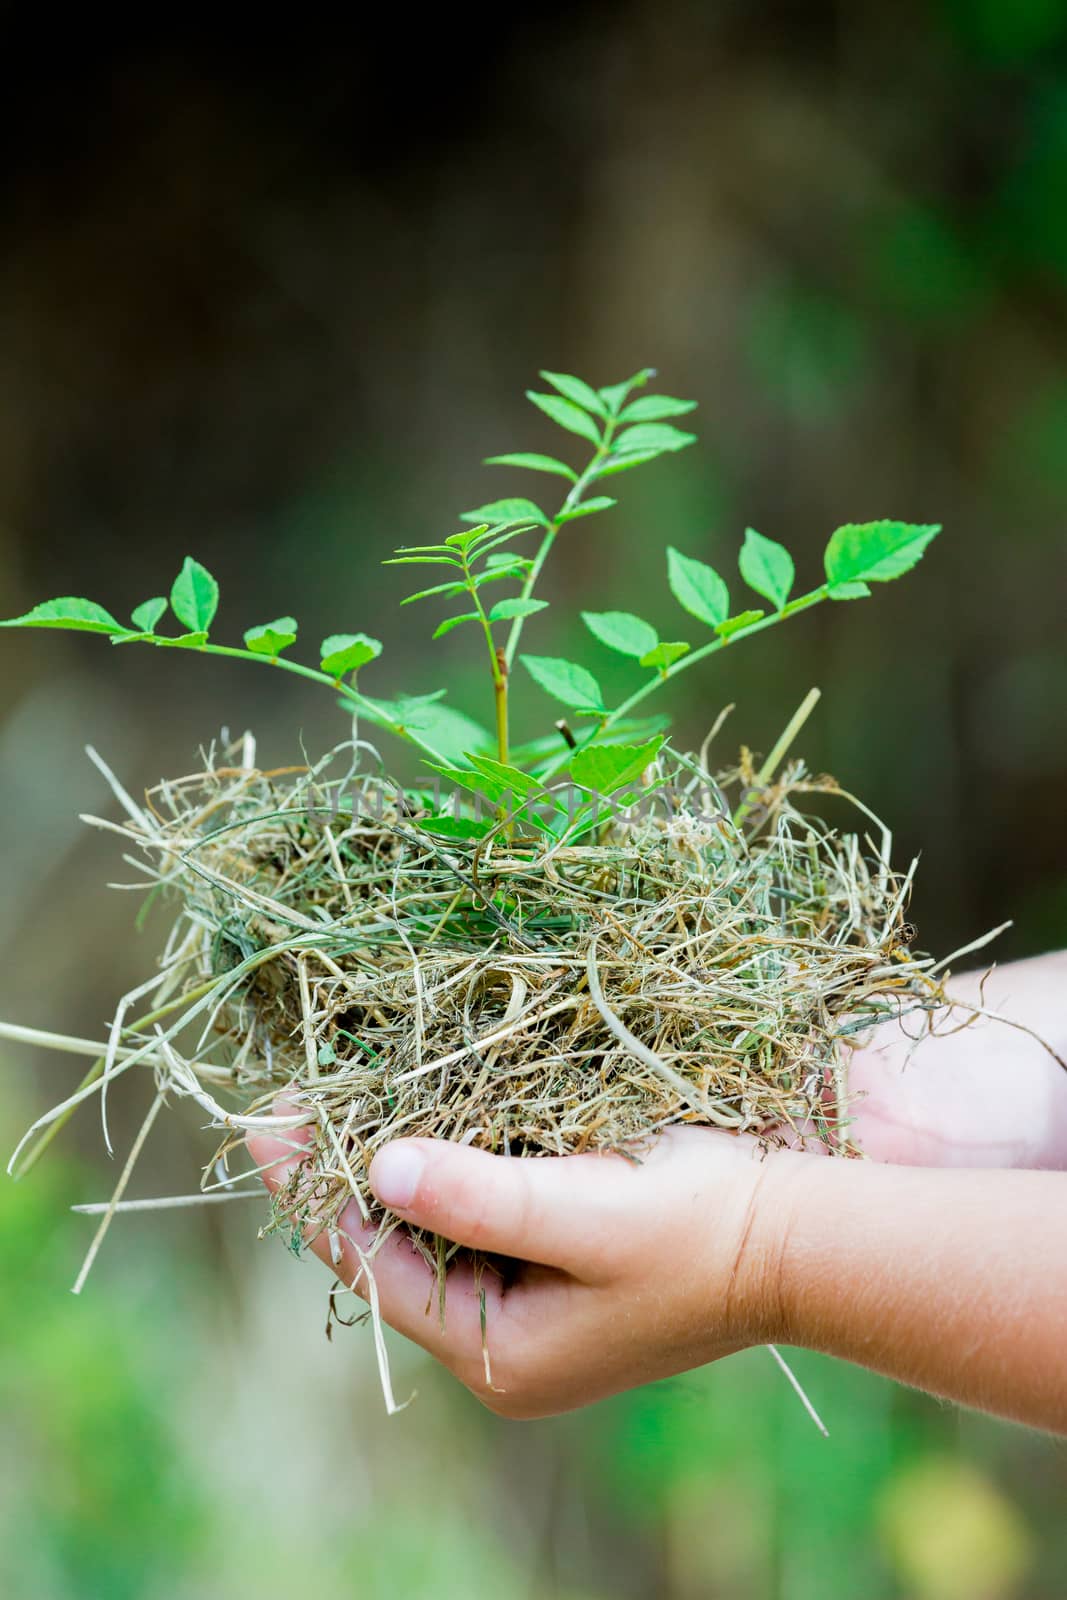 Closeup of child's hands holding fresh small plant outdoors